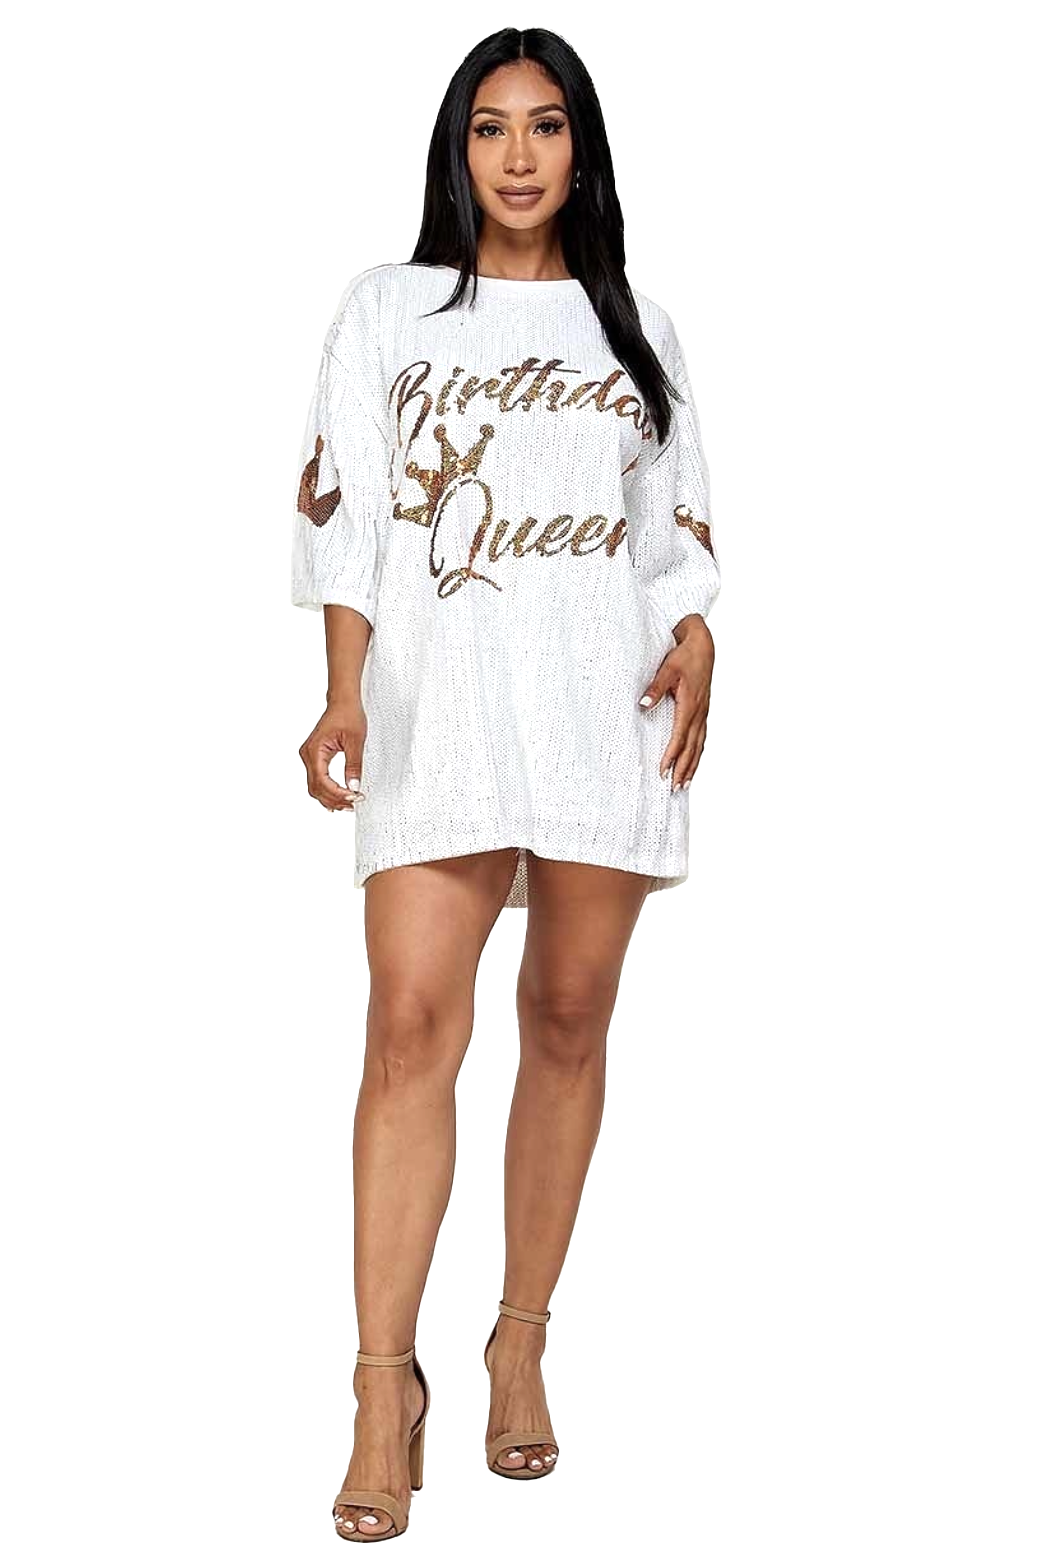 Birthday Crown Queen Sequin T-Shirt Dress - Gold Lettering